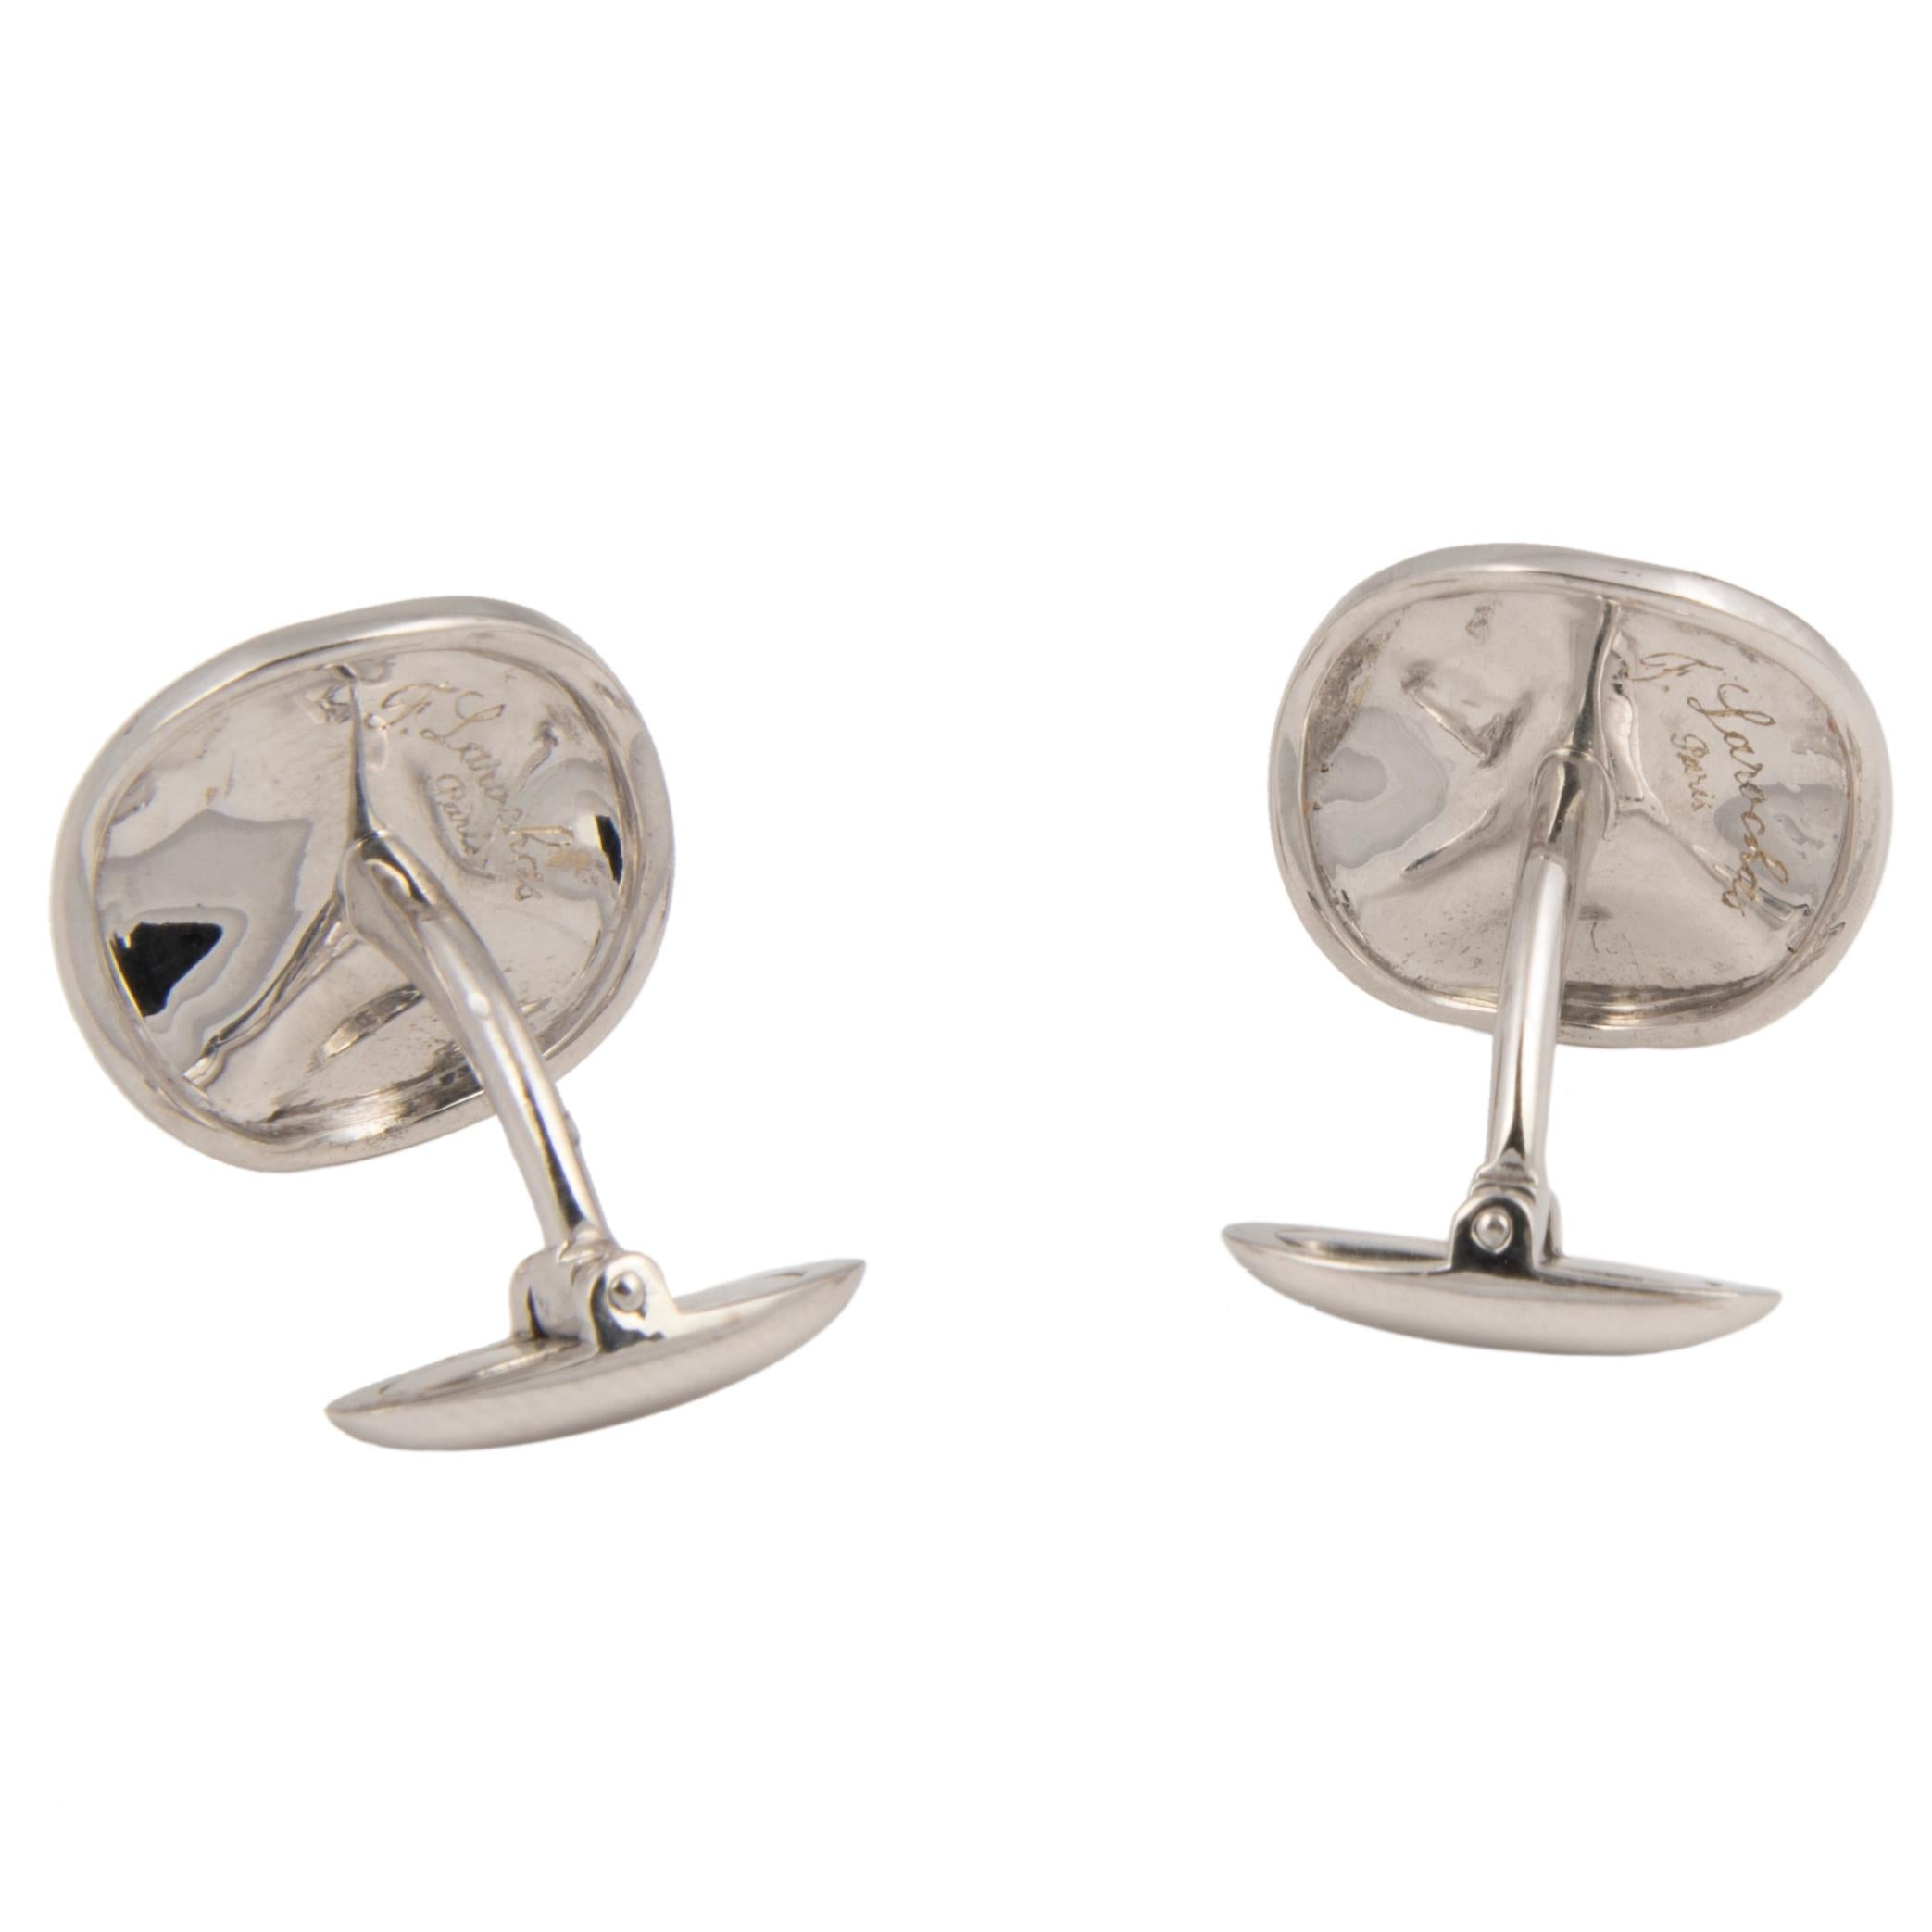 Florence Larochas 18 Karat White and Yellow Gold Cufflinks, Unique For Sale 1